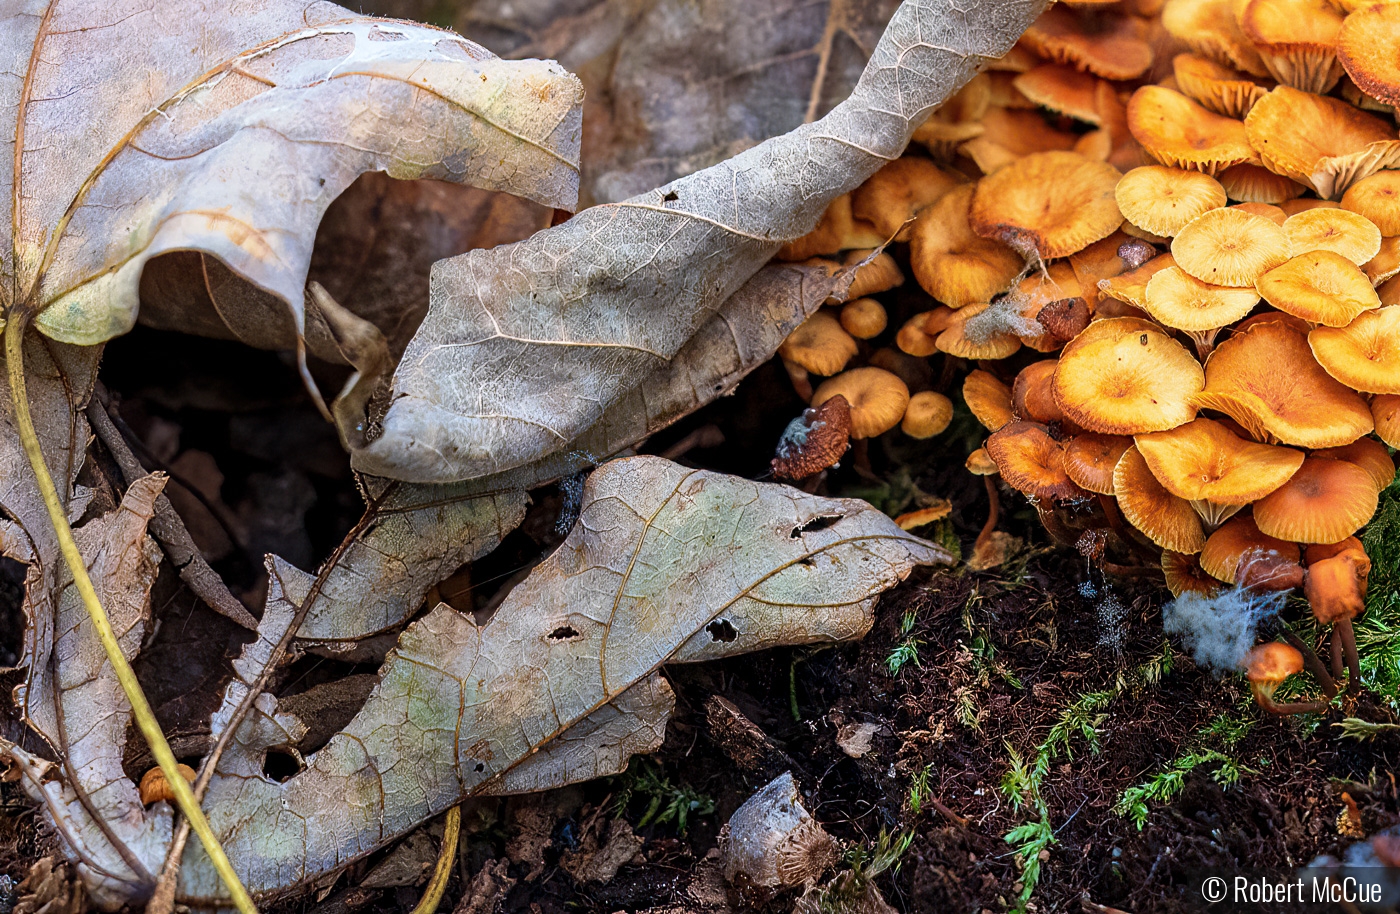 Mushrooms and leaves by Robert McCue